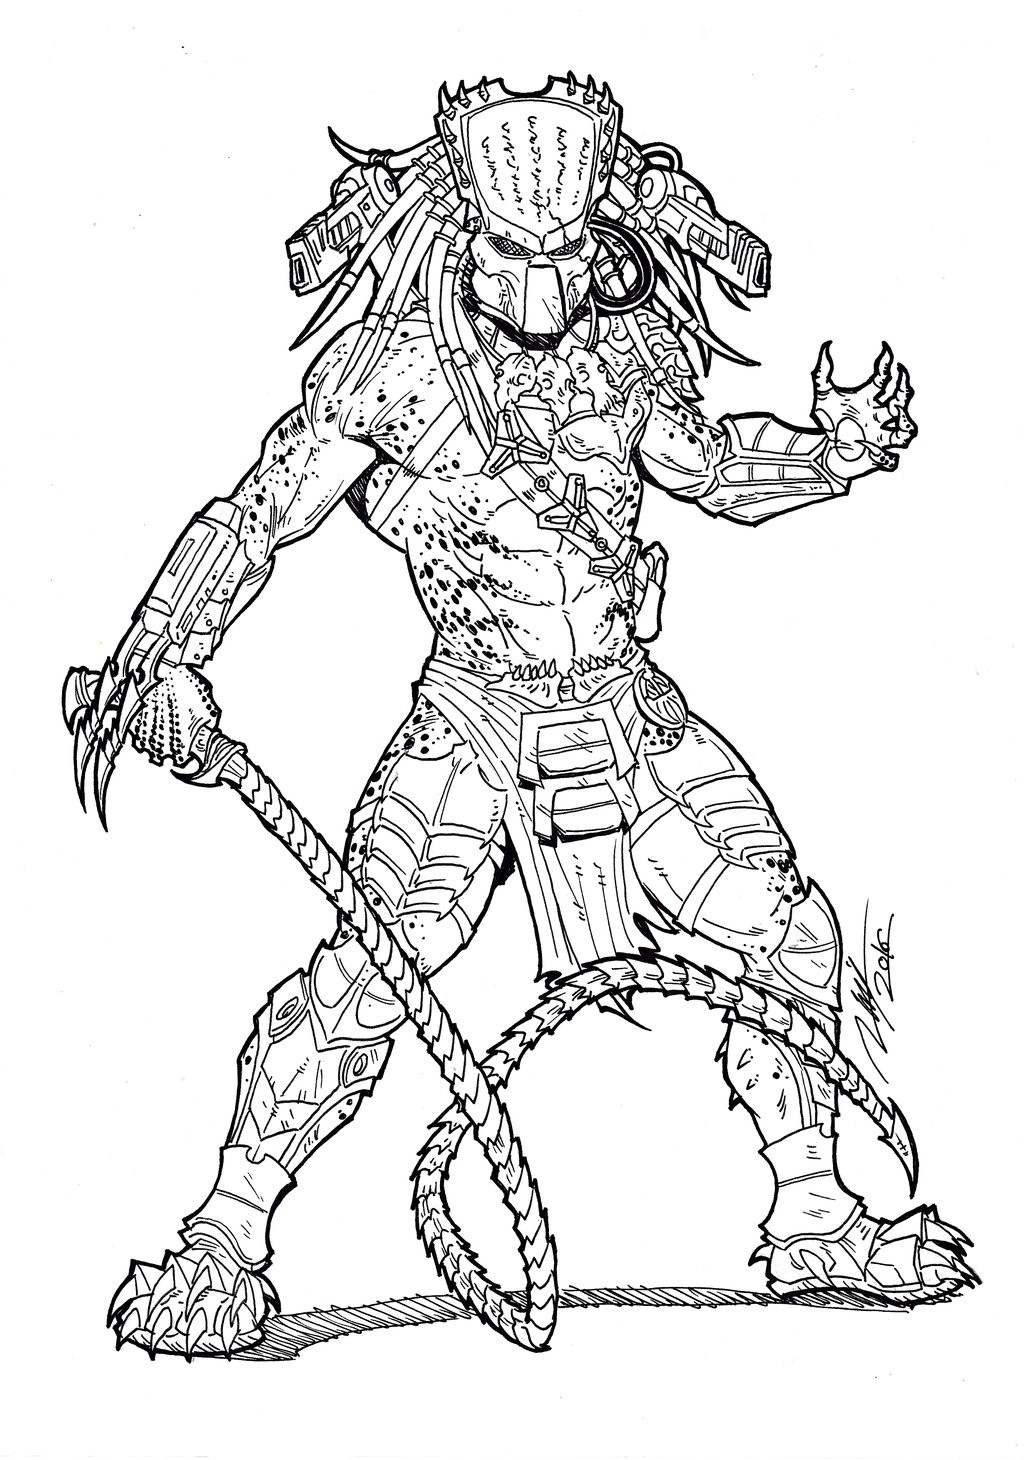 Predator Coloring Pages
 Predator and AVP art favourites by RicoIce on DeviantArt